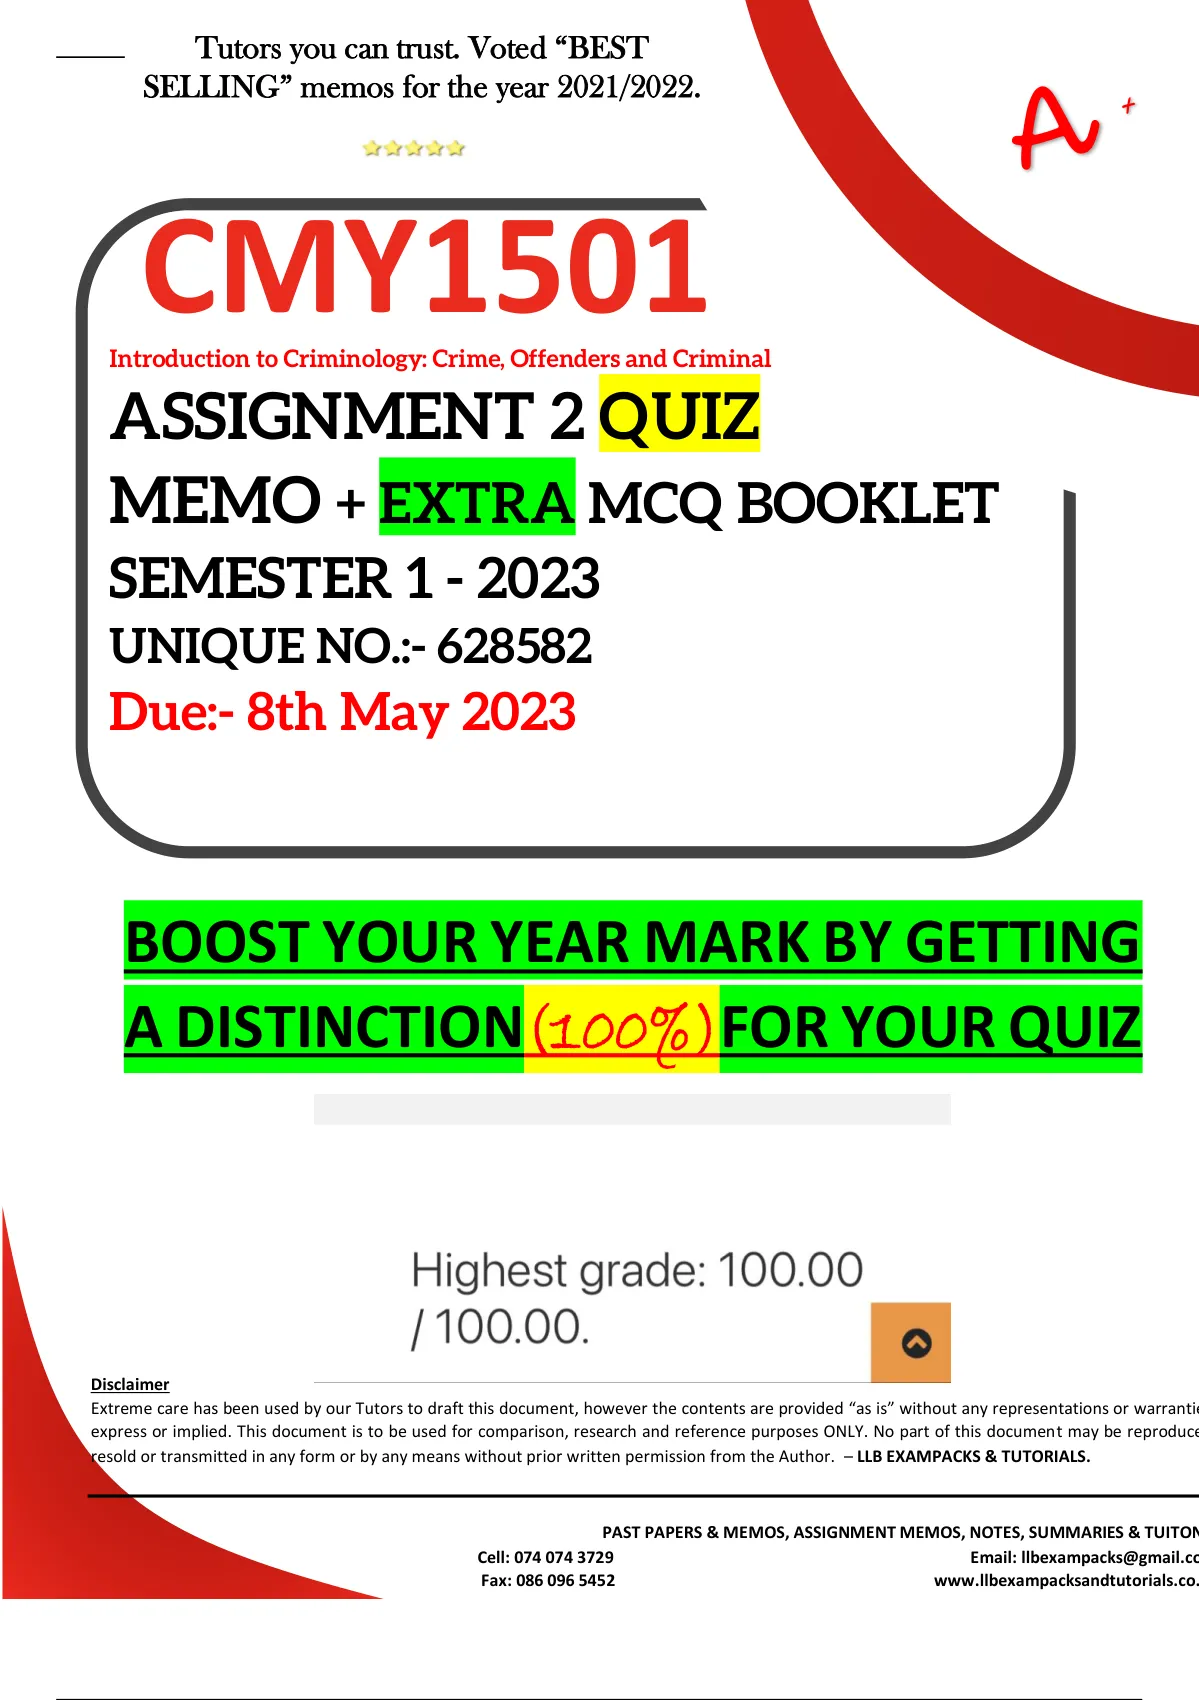 cmy1501 assignment 1 answers 2021